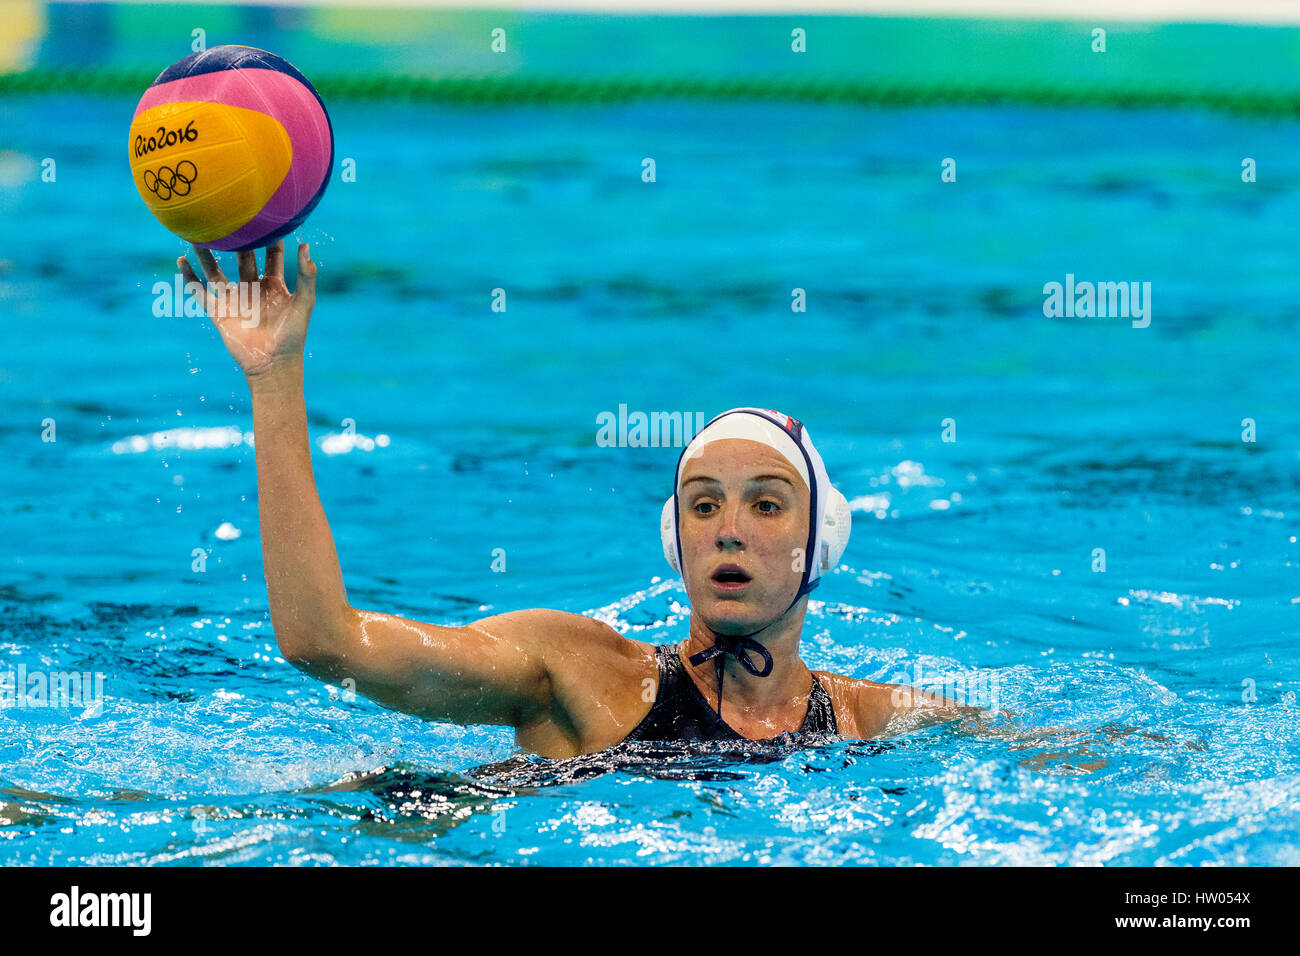 Rio de Janeiro, Brazil. 19 August 2016 Makenzie Fischer (USA) competes in the women's water polo gold medal match vs. Italy at the 2016 Olympic Summer Stock Photo